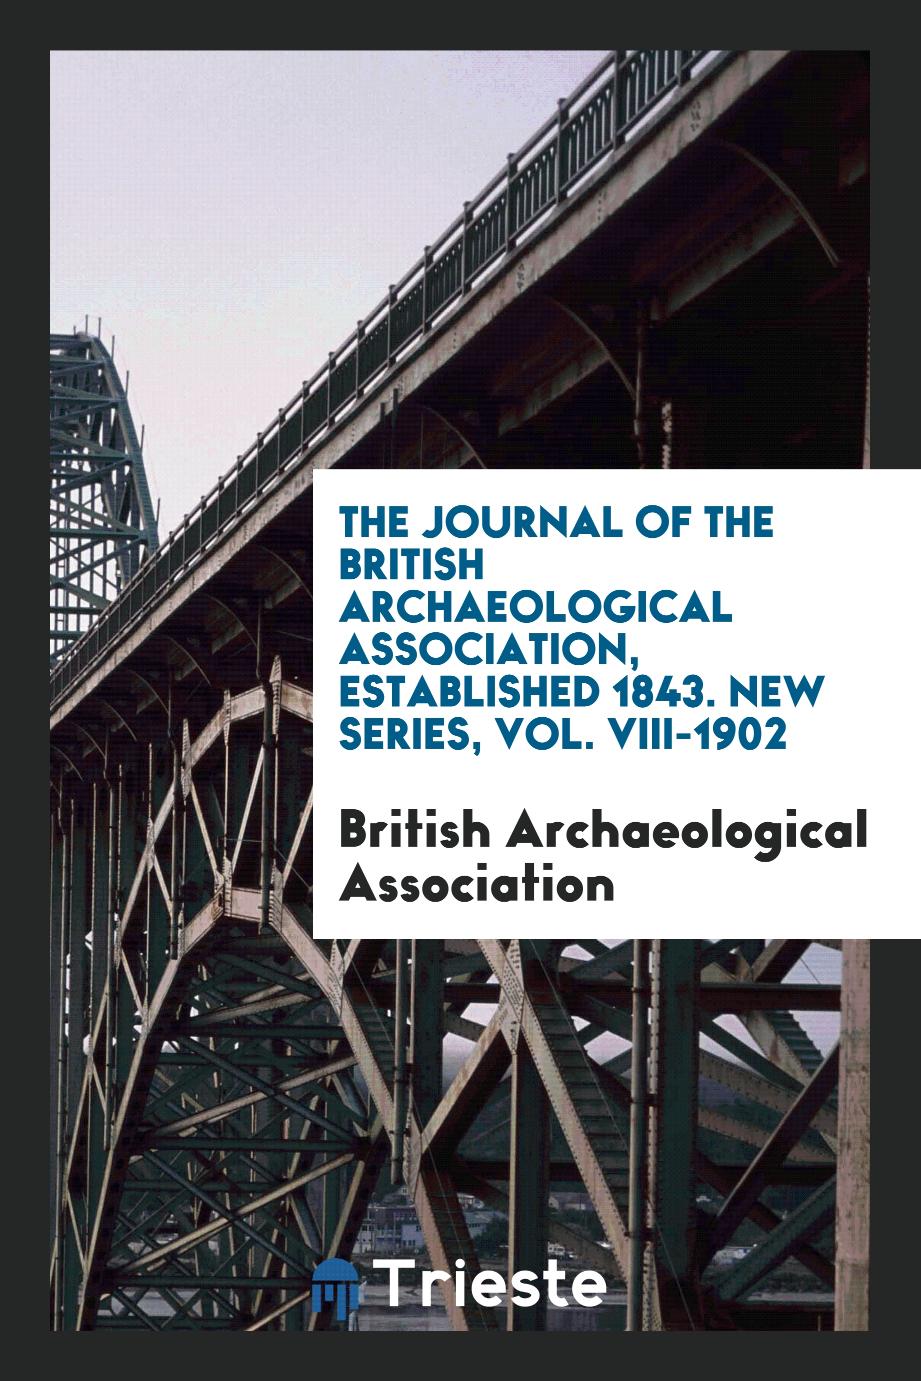 The Journal of the British Archaeological Association, Established 1843. New Series, Vol. VIII-1902